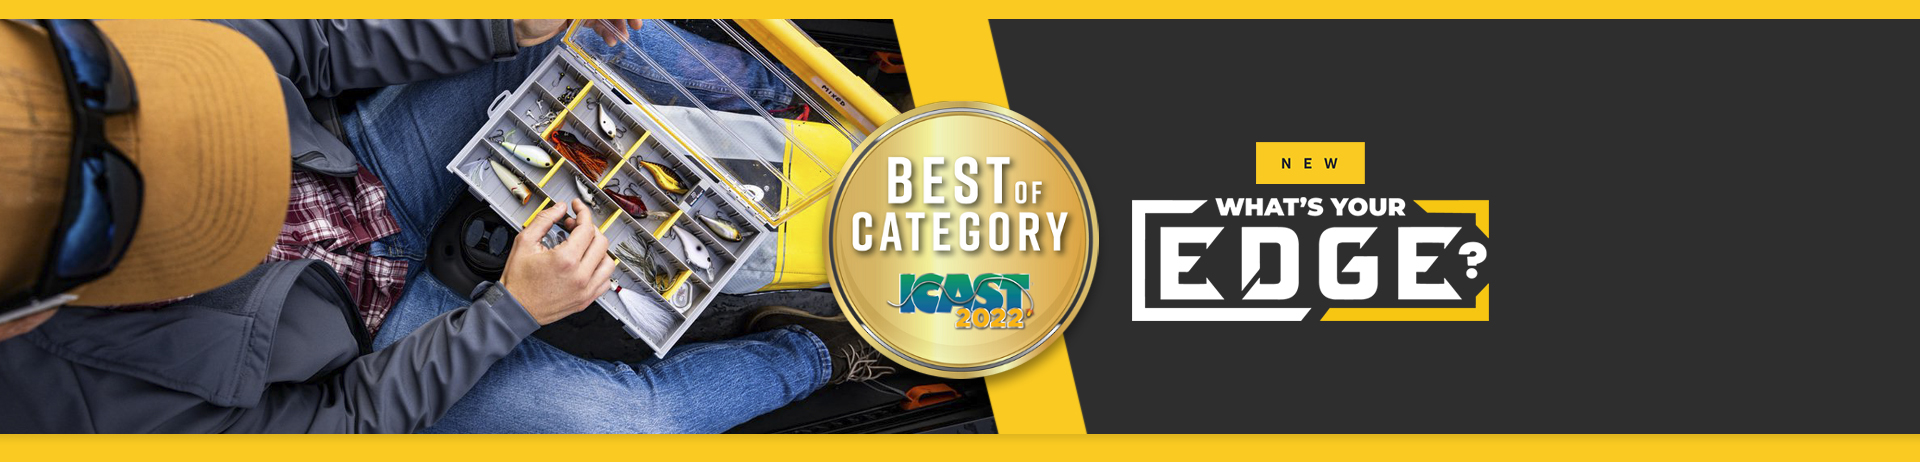 Plano Edge Flex: Best of Category at iCast 2020!